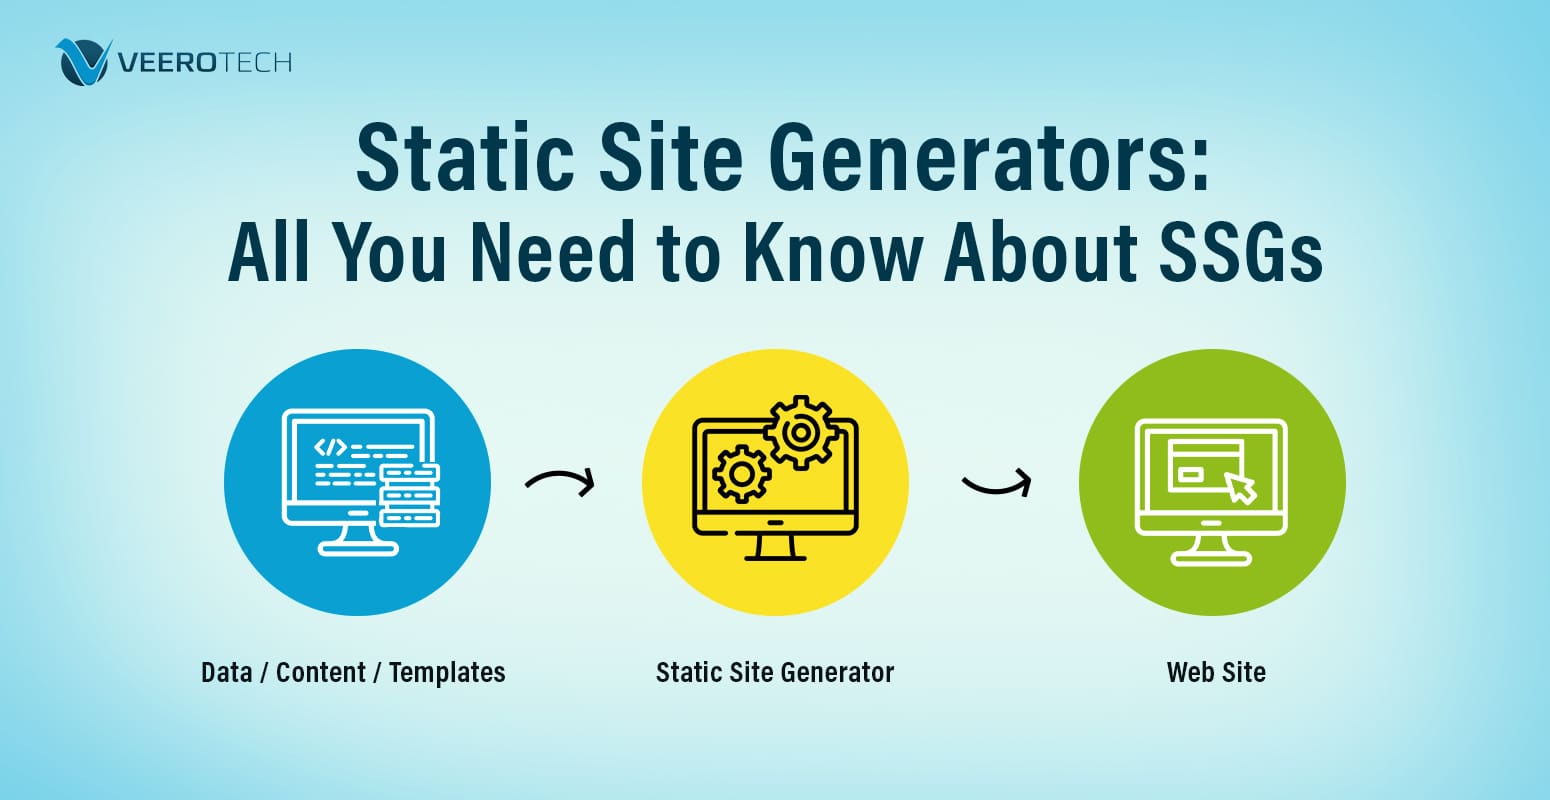 Static Generators: All You Need to Know About SSGs